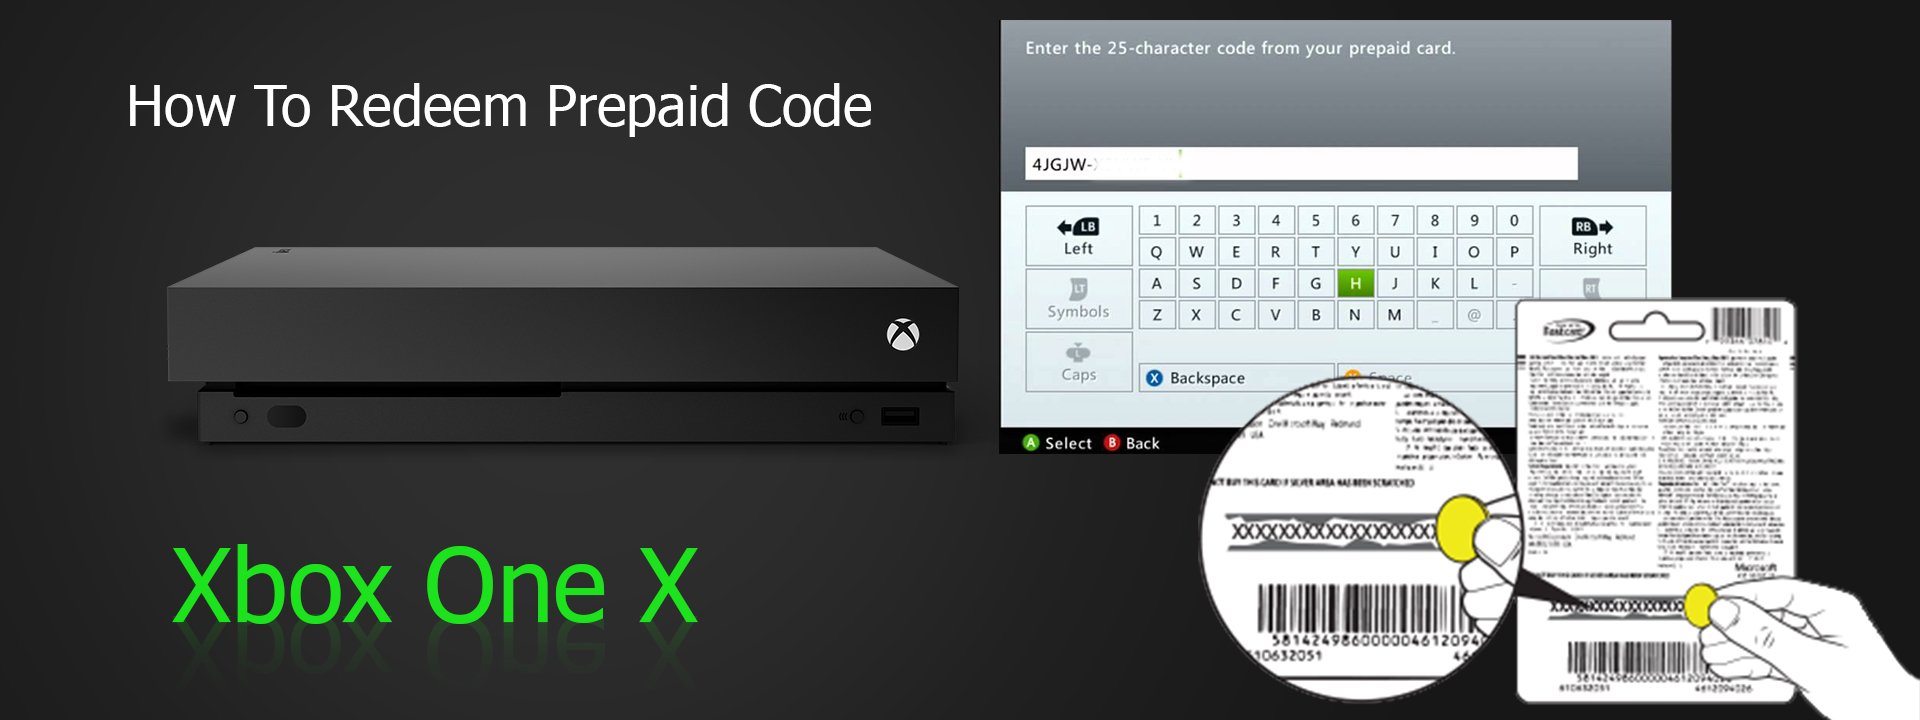 redeem gift card on xbox one